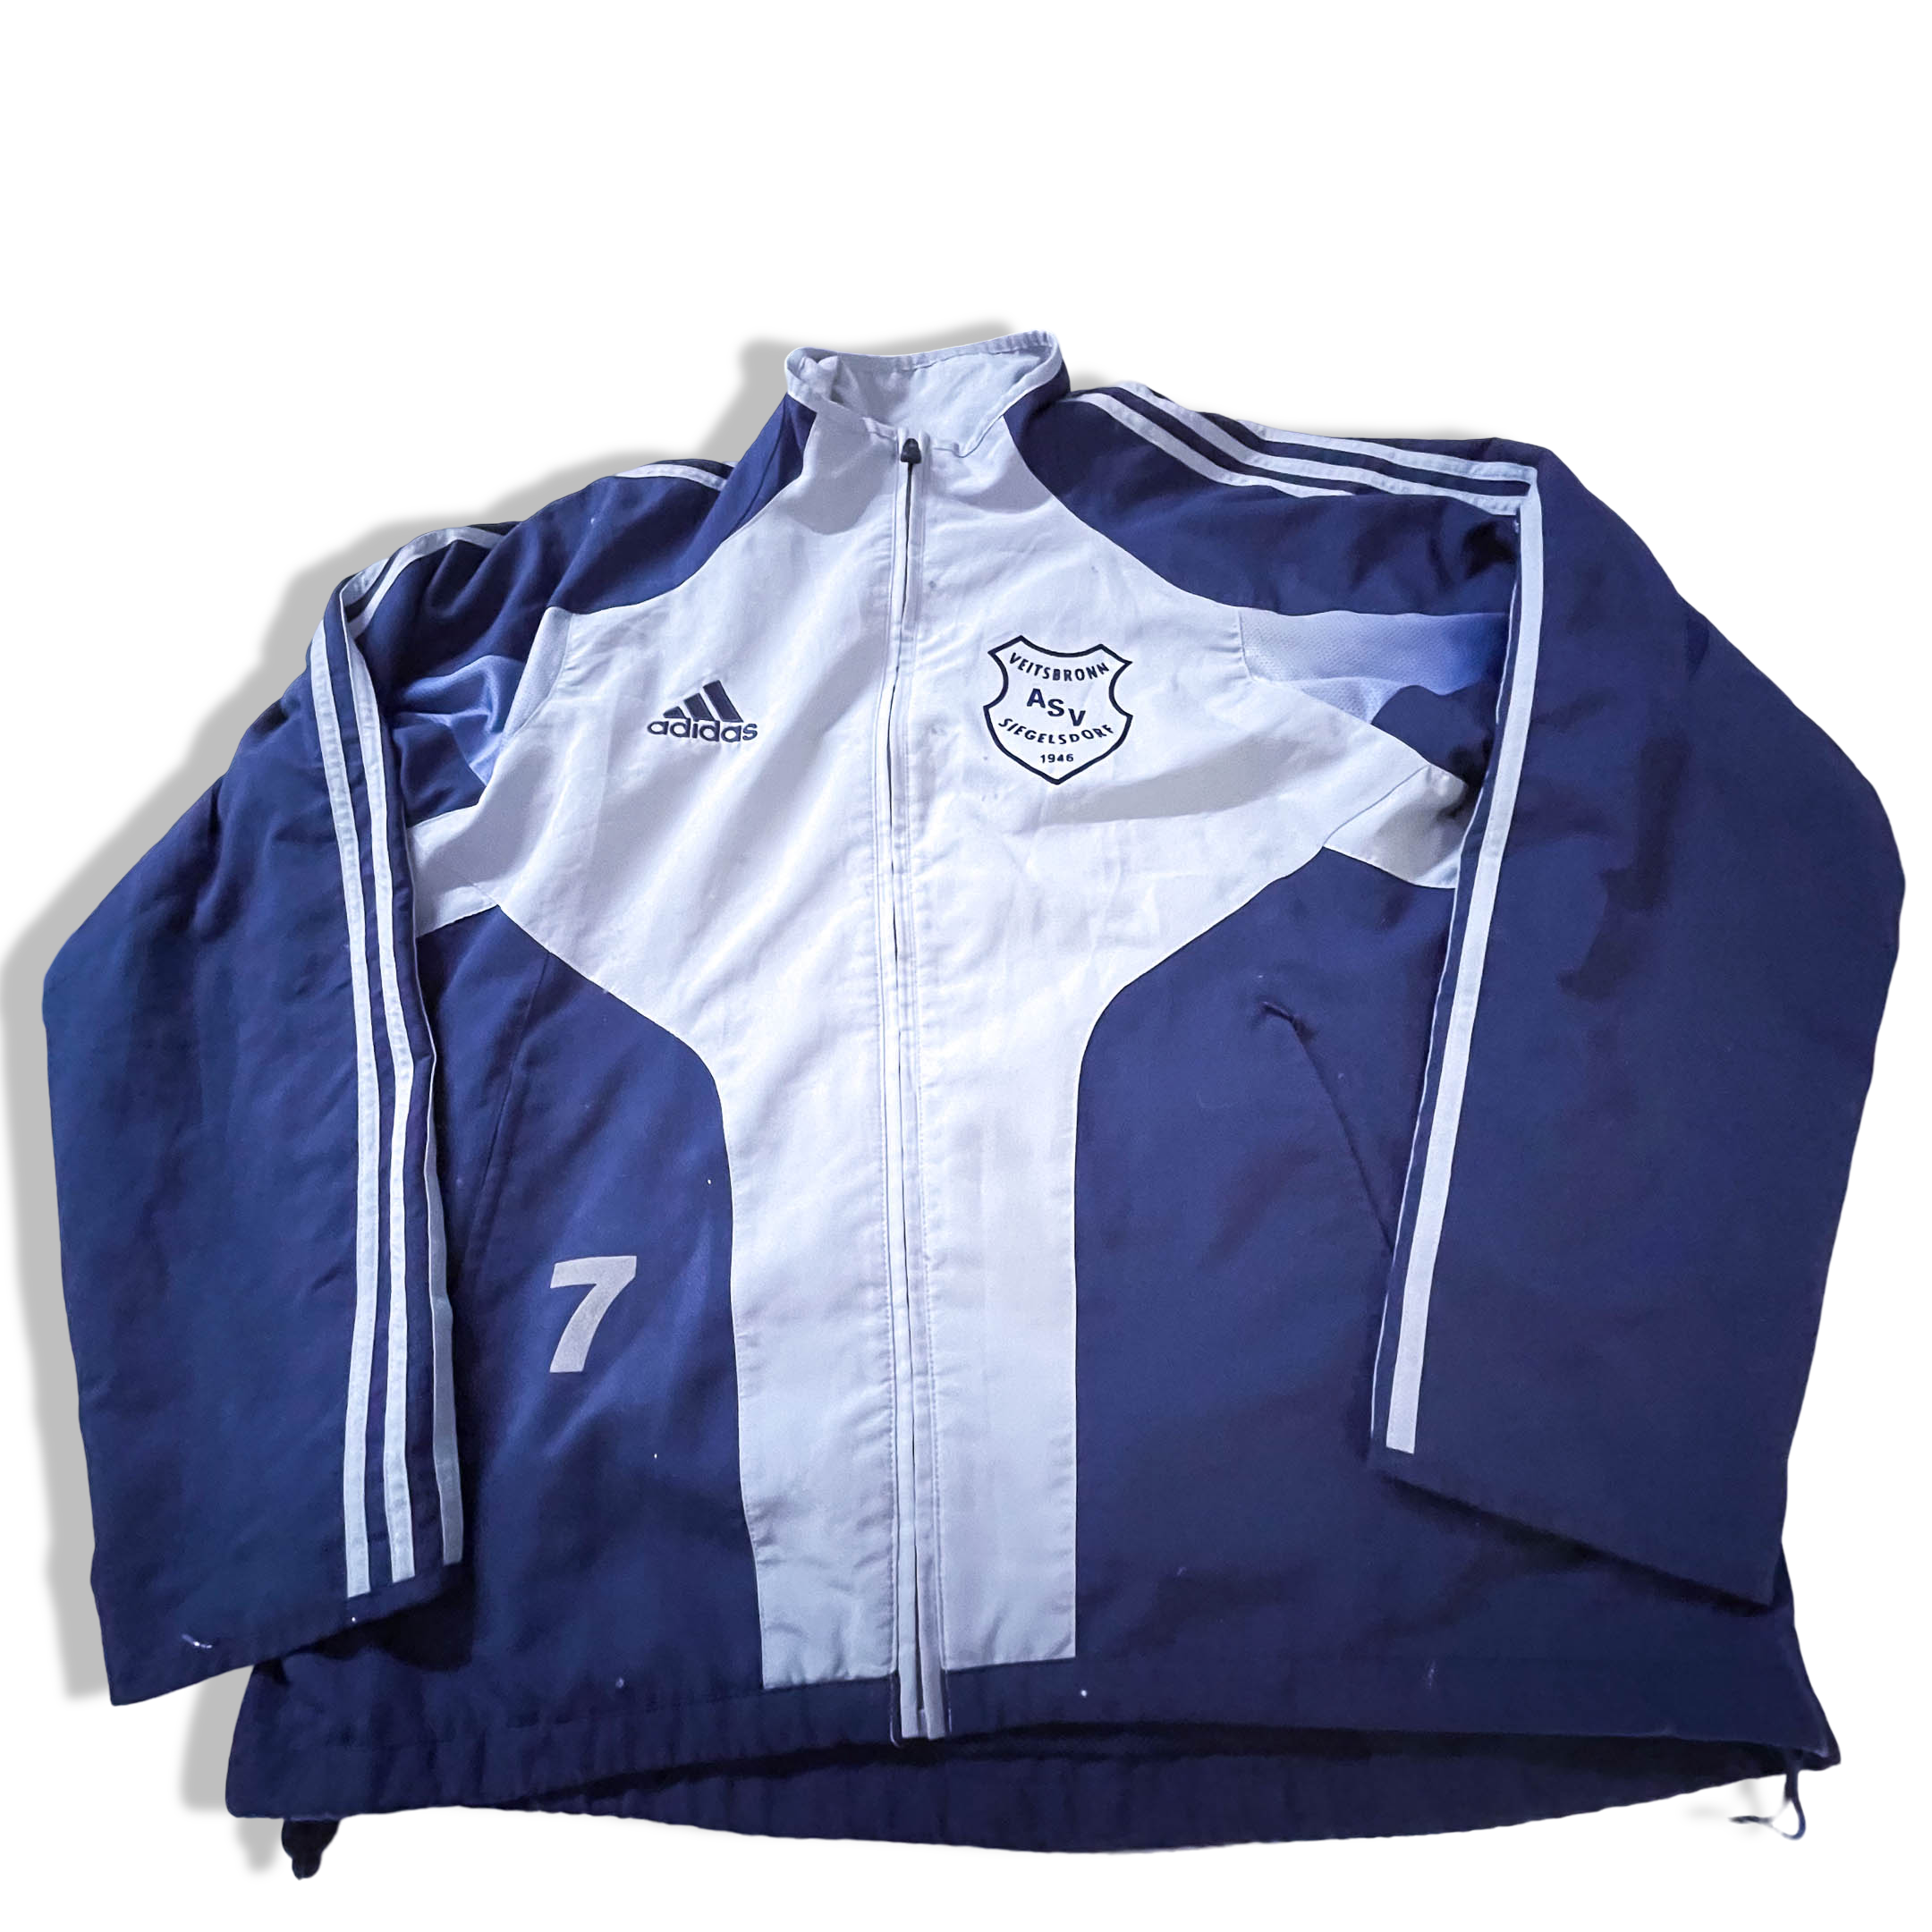 Vintage Adidas ASV blue full zip track top in M|L30 W23|Made in China